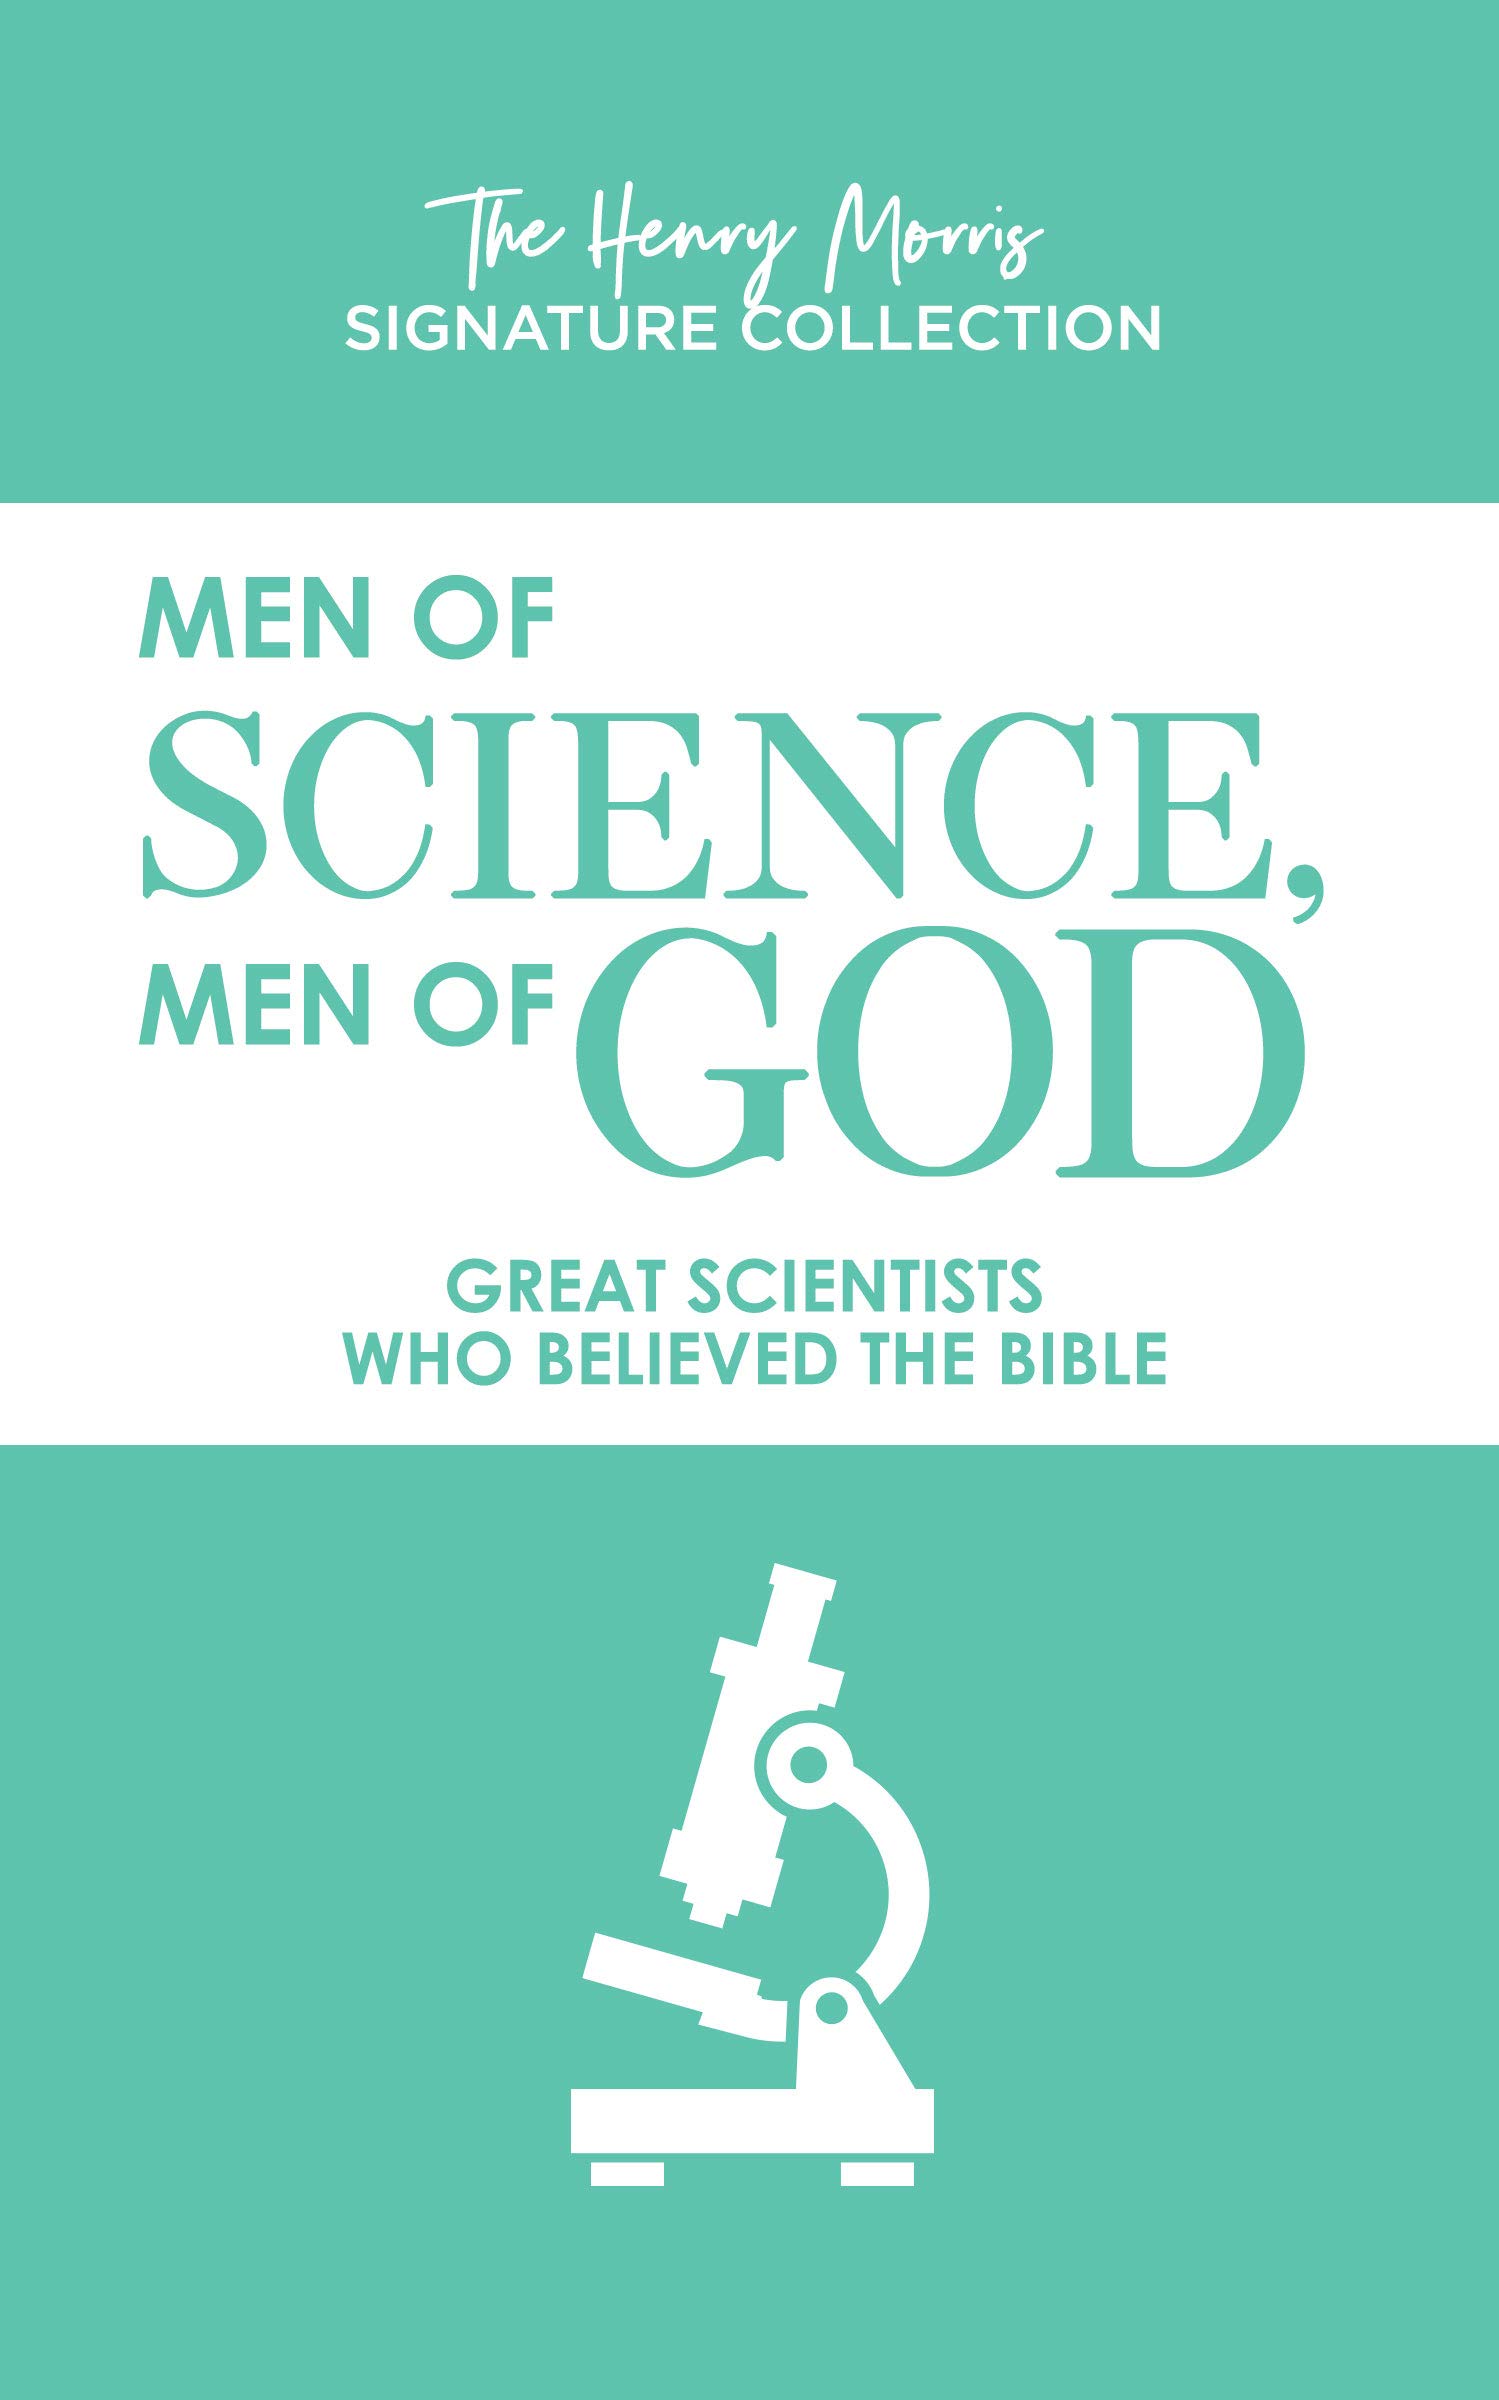 Men of Science, Men of God (The Henry Morris Signature Collection)